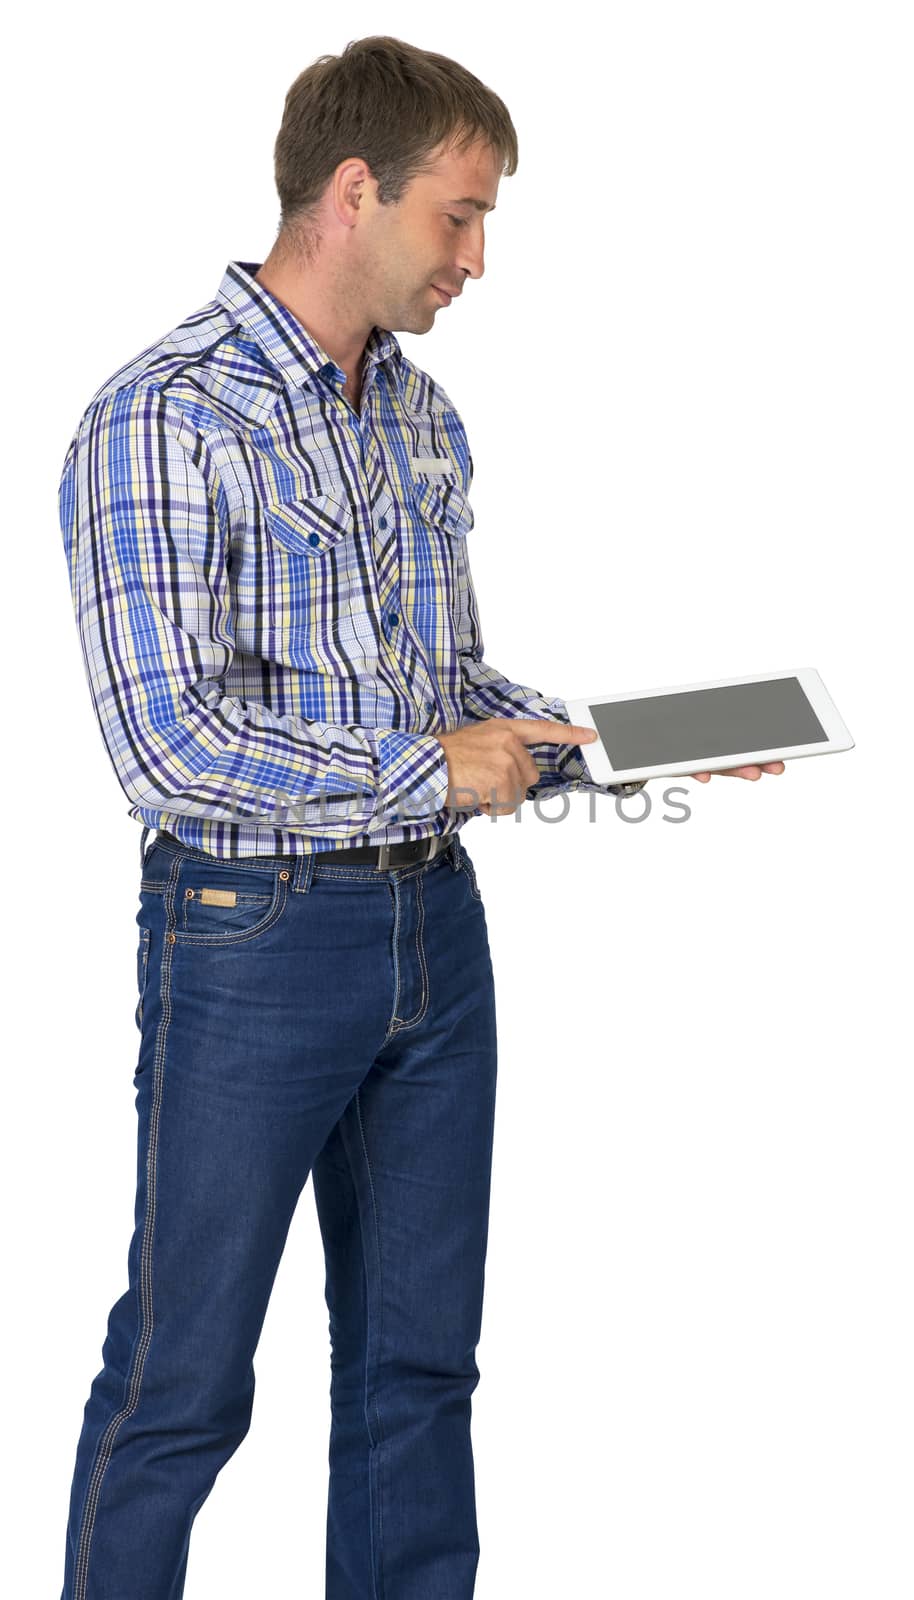 Portrait of man using his tablet pc against white background